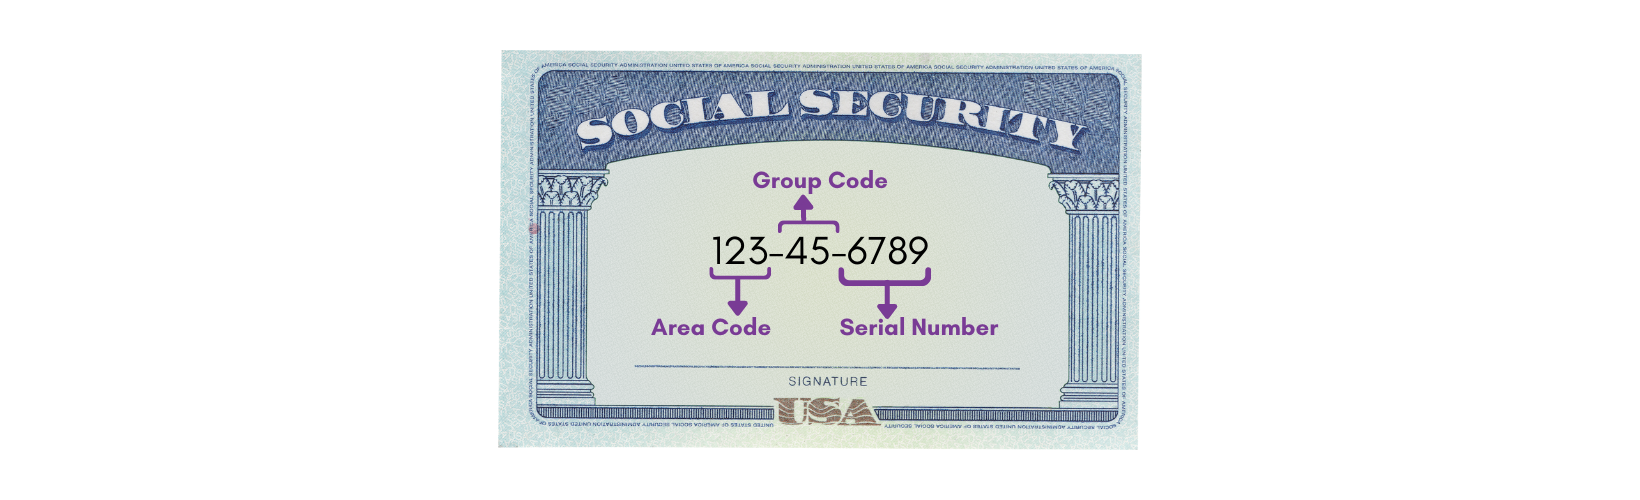 Social Security Graphic